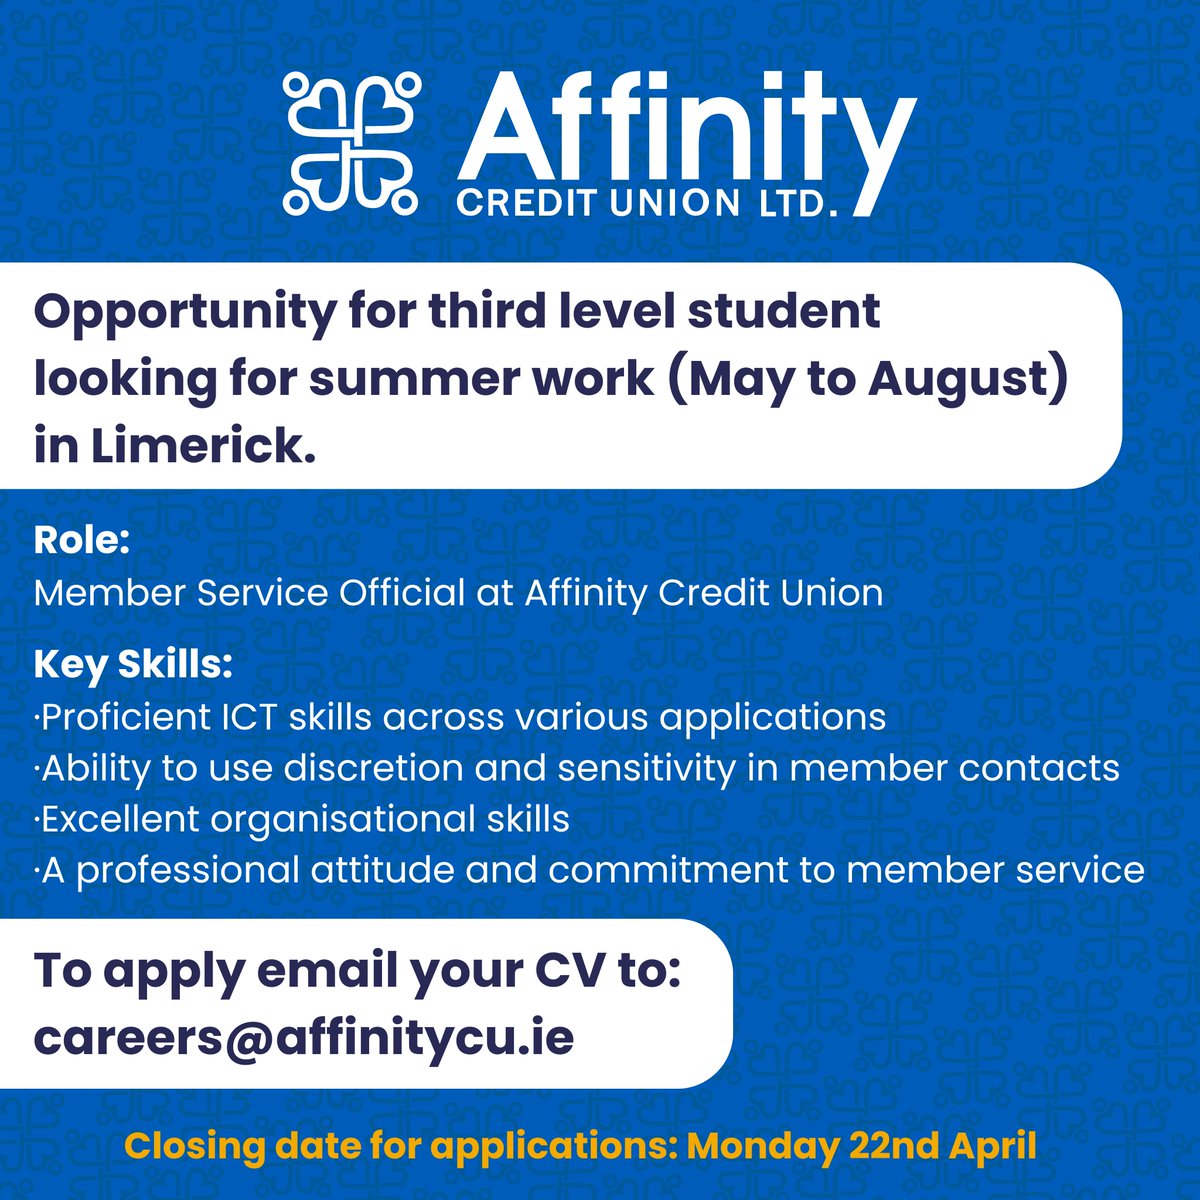 Summer Job Opportunity - Affinity Credit Union (Limerick) 📣☀ Role: Member Service Official from May-August If interested please email CV to careers@affinitycu.ie Closing date is Monday, April 22nd #ad #jobfairy #limerick